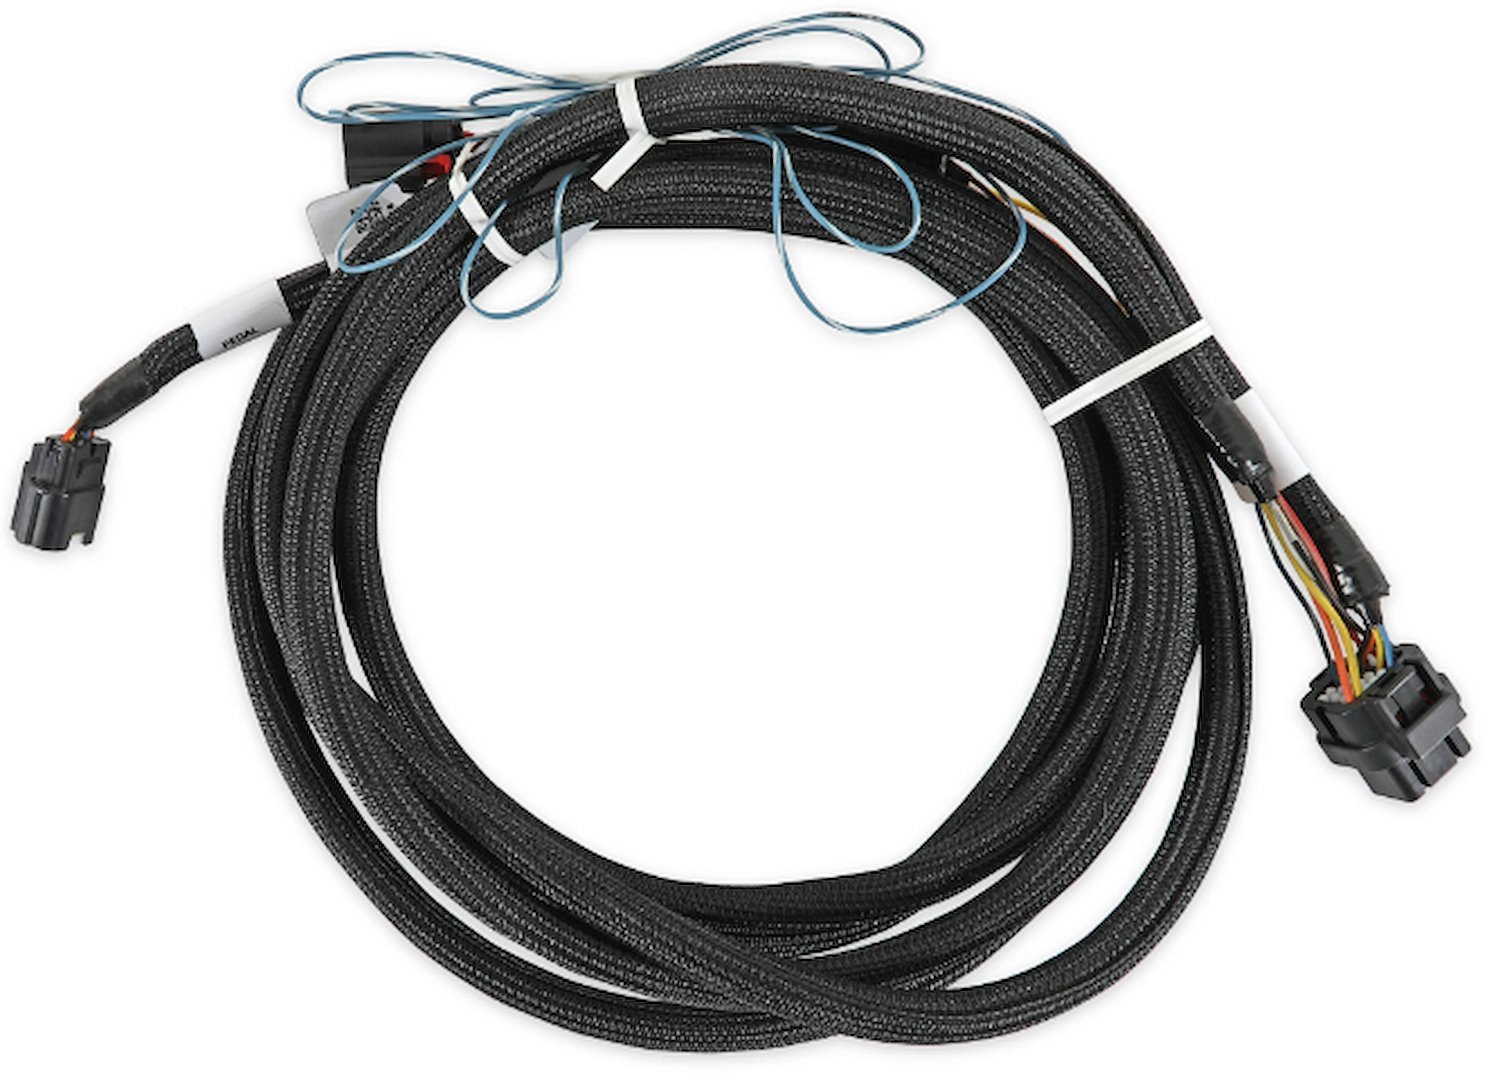 558-469 Terminator X EFI Ford Drive-By-Wire (DBW) Harness for 2018-2022 Ford Engines